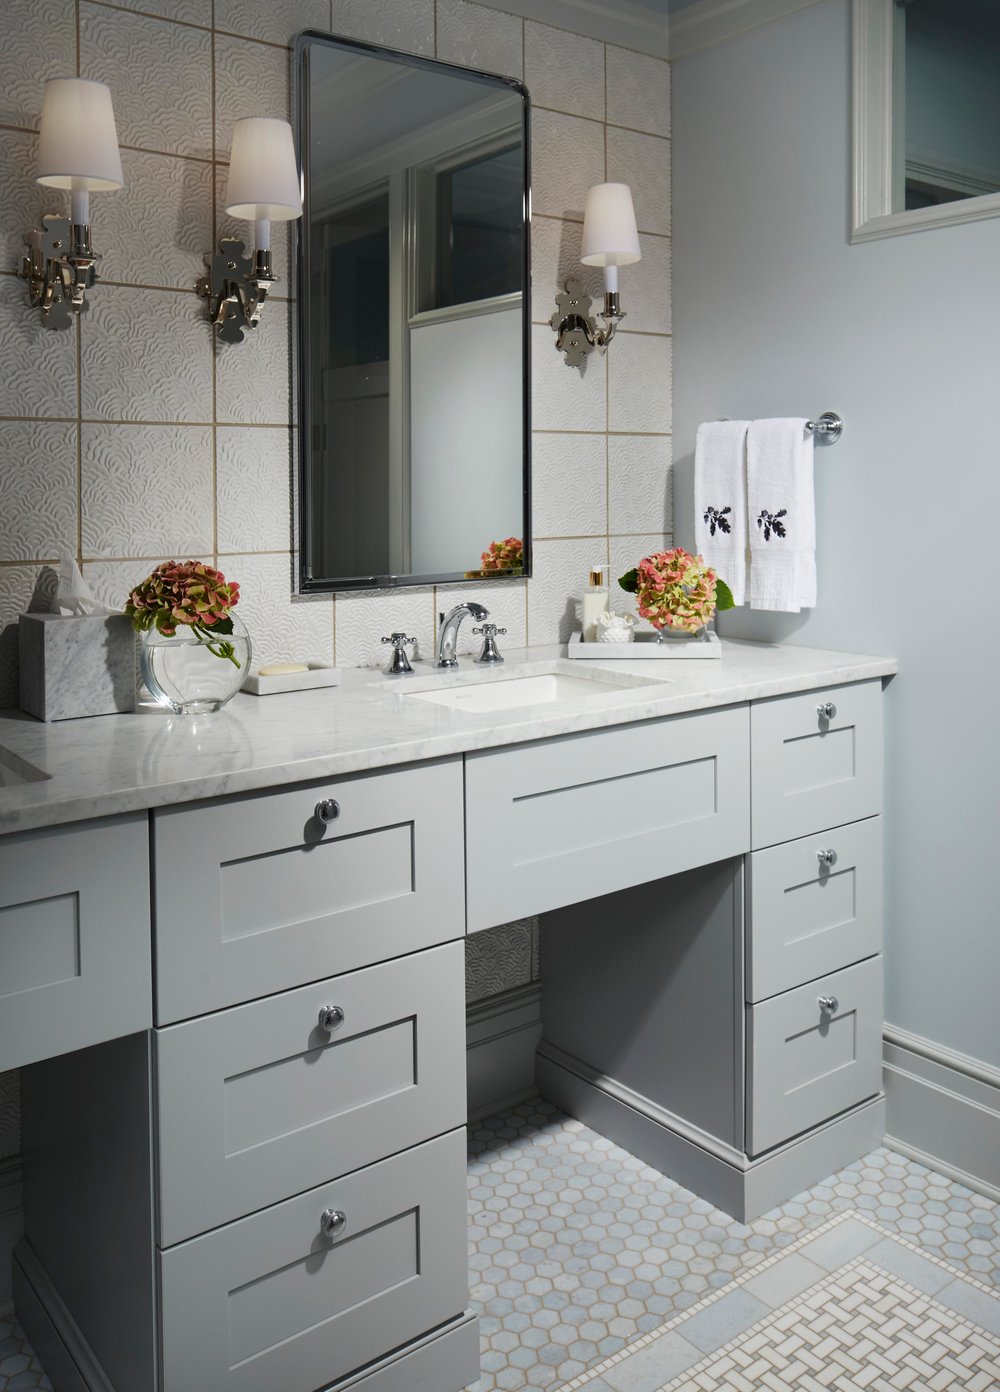 Classic bathroom with light gray vanity. Come see more interior design inspiration from Elizabeth Drake. Photo by Werner Straube. #interiordesign #classicdesign #traditionaldecor #housetour #elizabethdrake